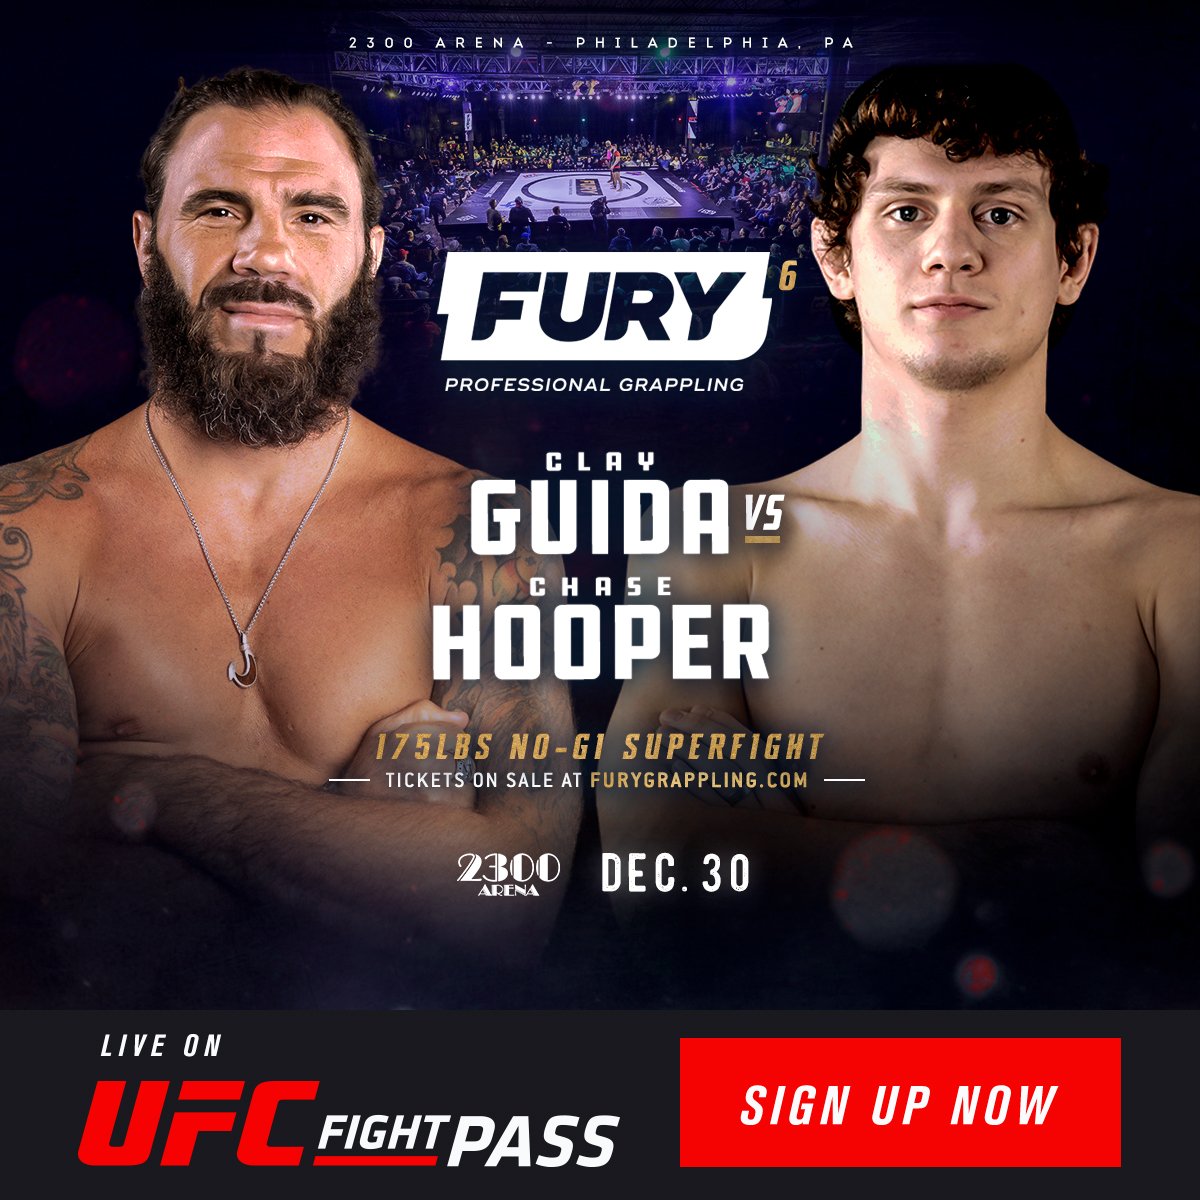 FURY Professional Grappling returns for blockbuster year-end event on Friday, December 30 — Cage Fury Fighting Championships